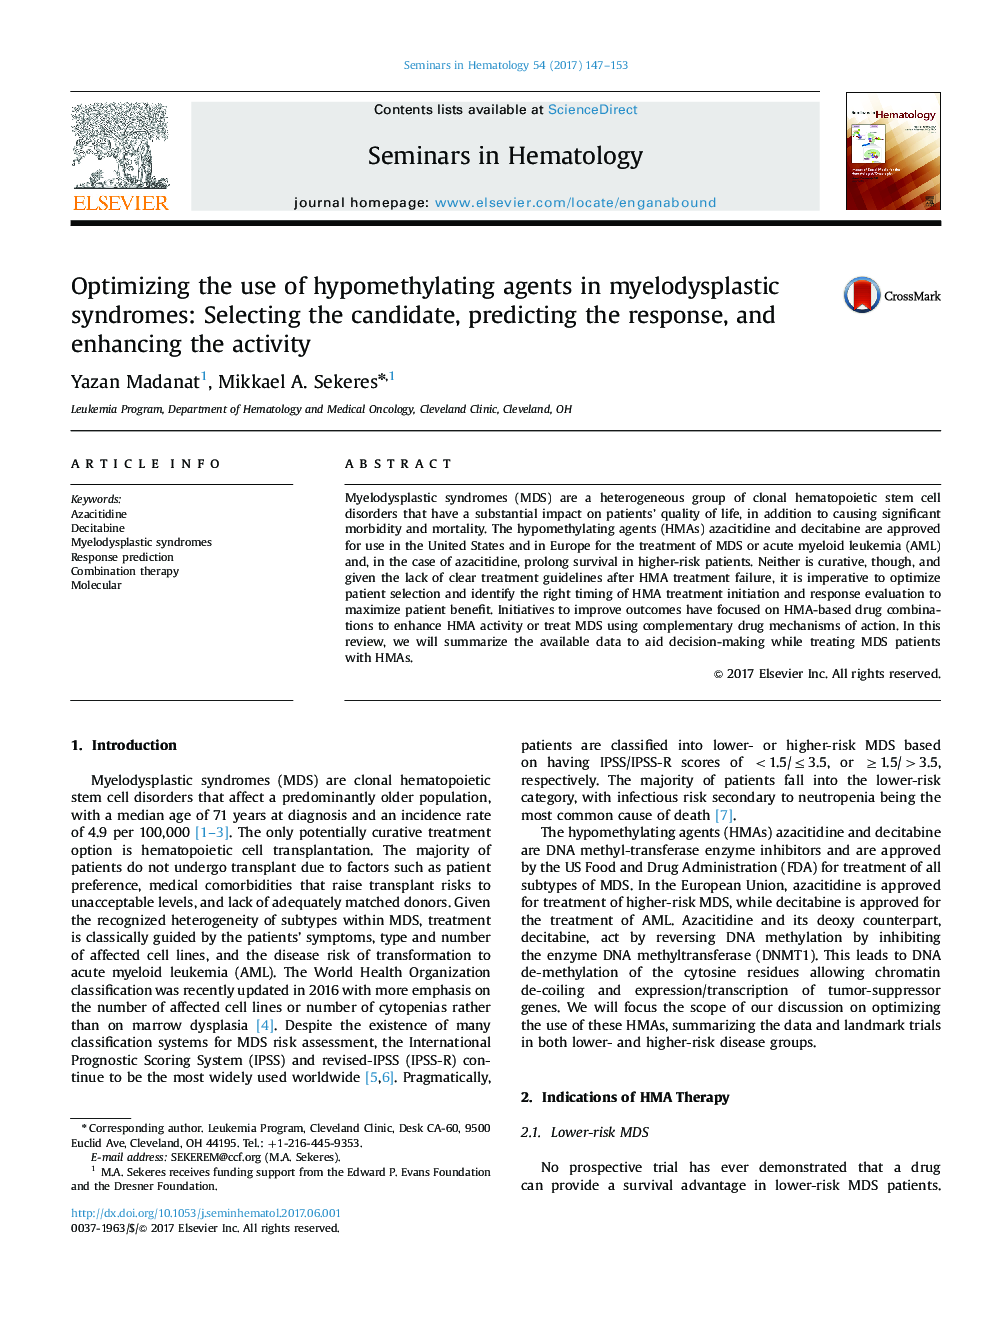 Optimizing the use of hypomethylating agents in myelodysplastic syndromes: Selecting the candidate, predicting the response, and enhancing the activity